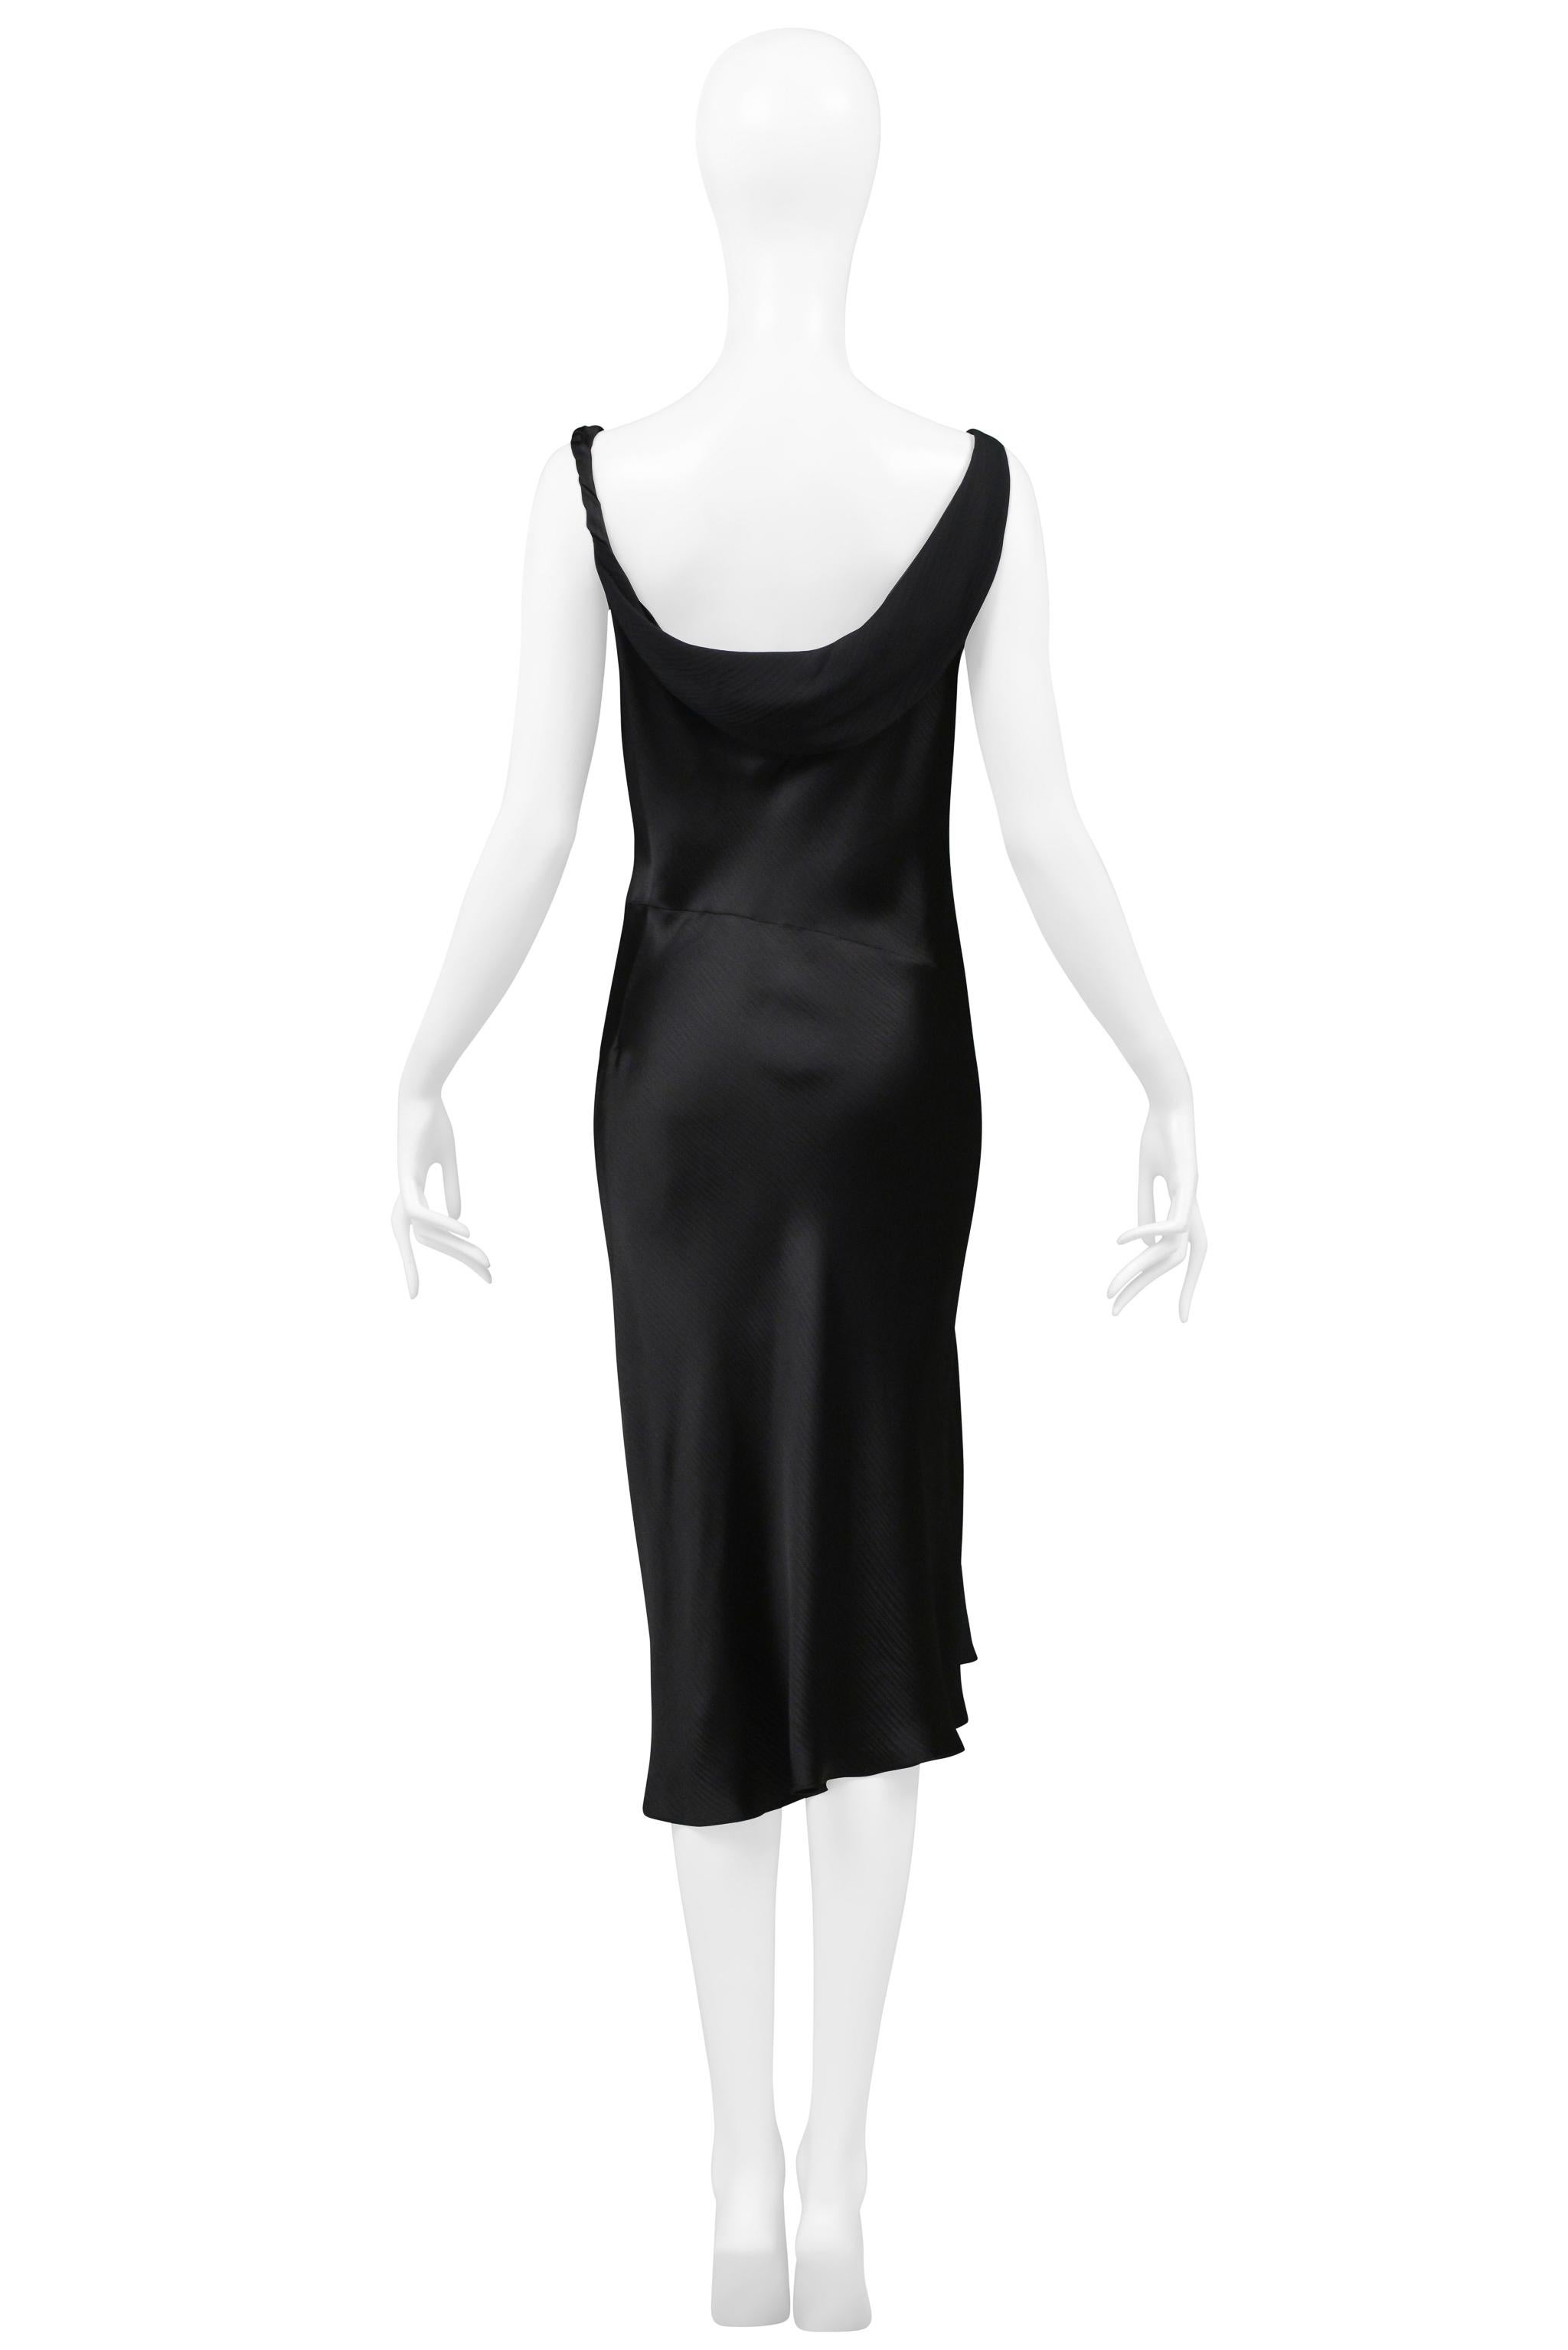 Stunning John Galliano Black Satin Slip Dress with Hip Knot and Slit 1990s For Sale 4